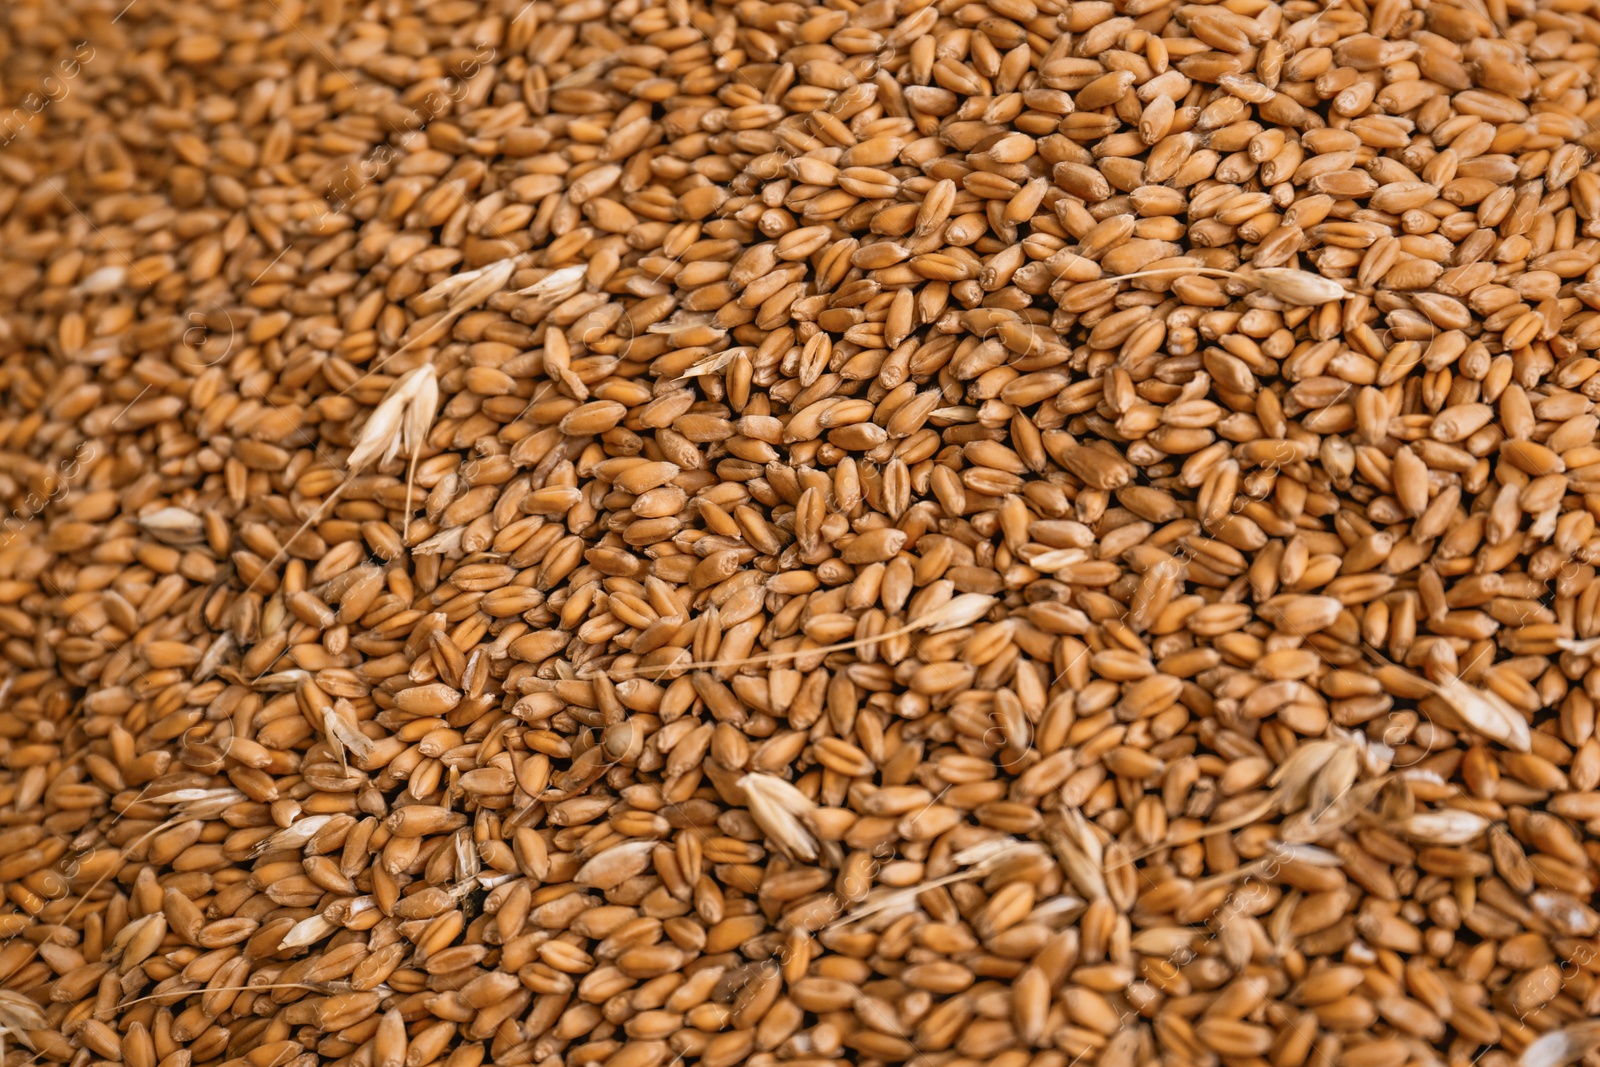 Photo of Pile of wheat grains as background, closeup view